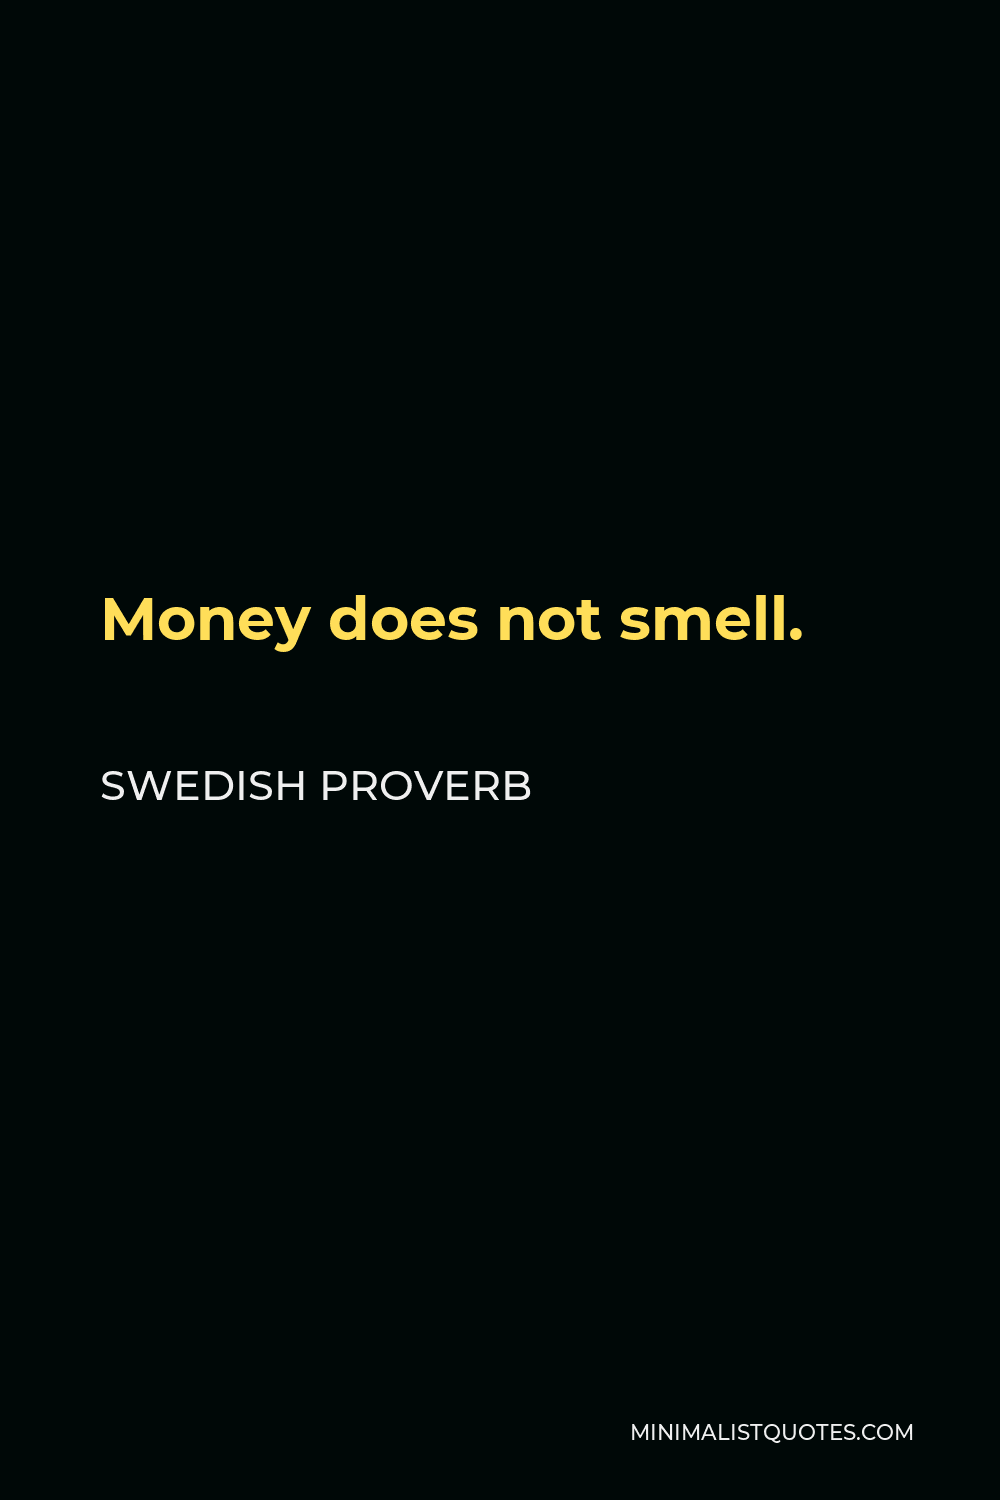 Swedish Proverb Quote - Money does not smell.